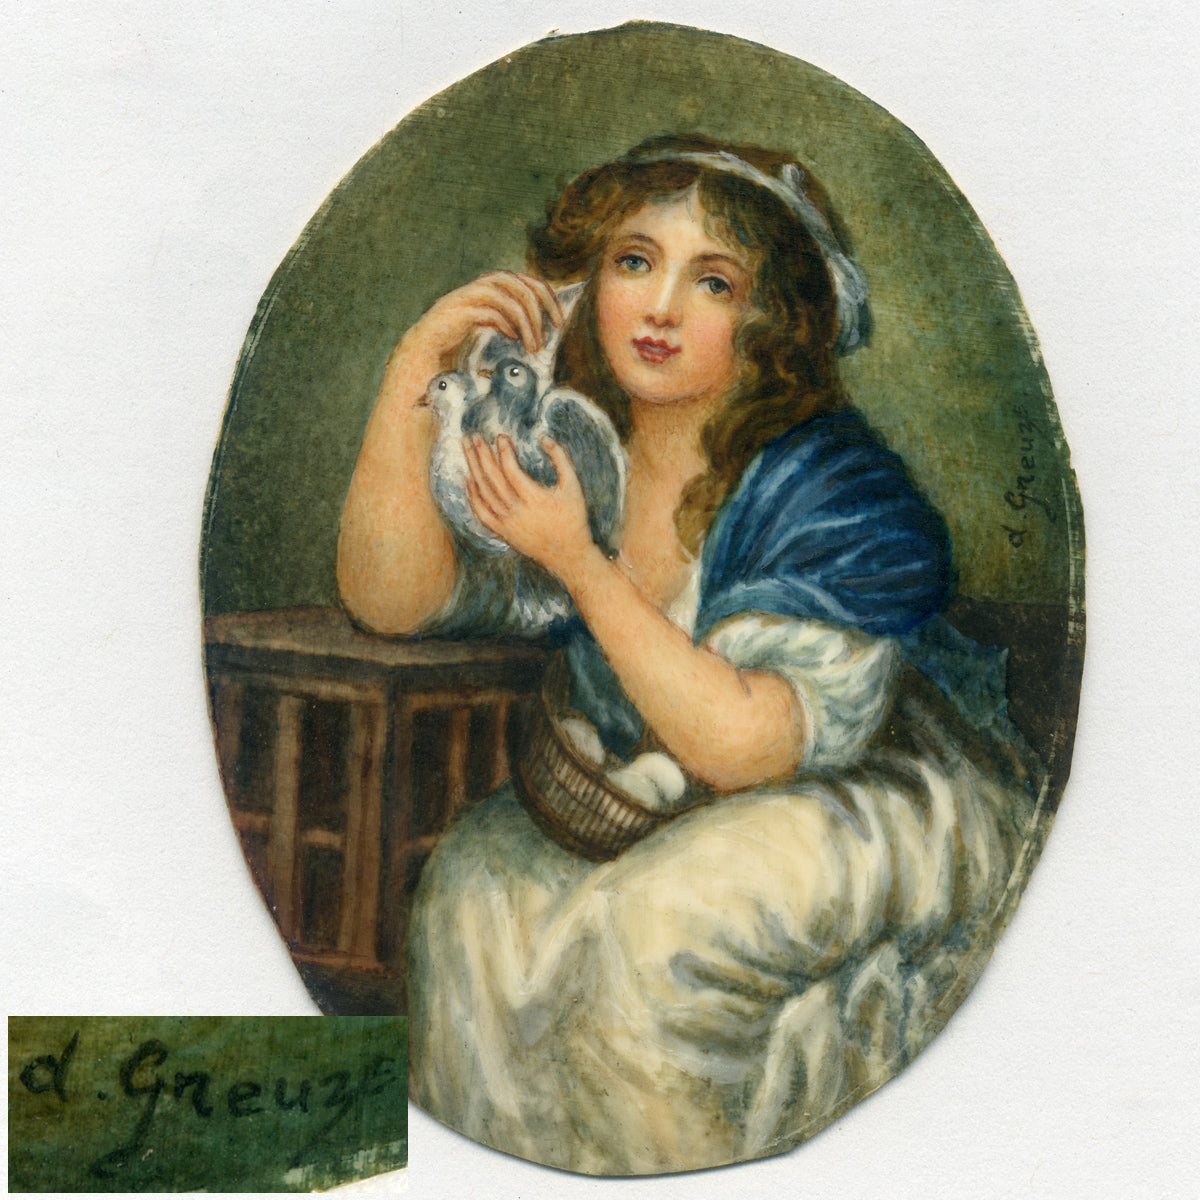 Antique French Miniature Painting, “Girl with Doves” after Orig. by Jean-Baptiste Greuze